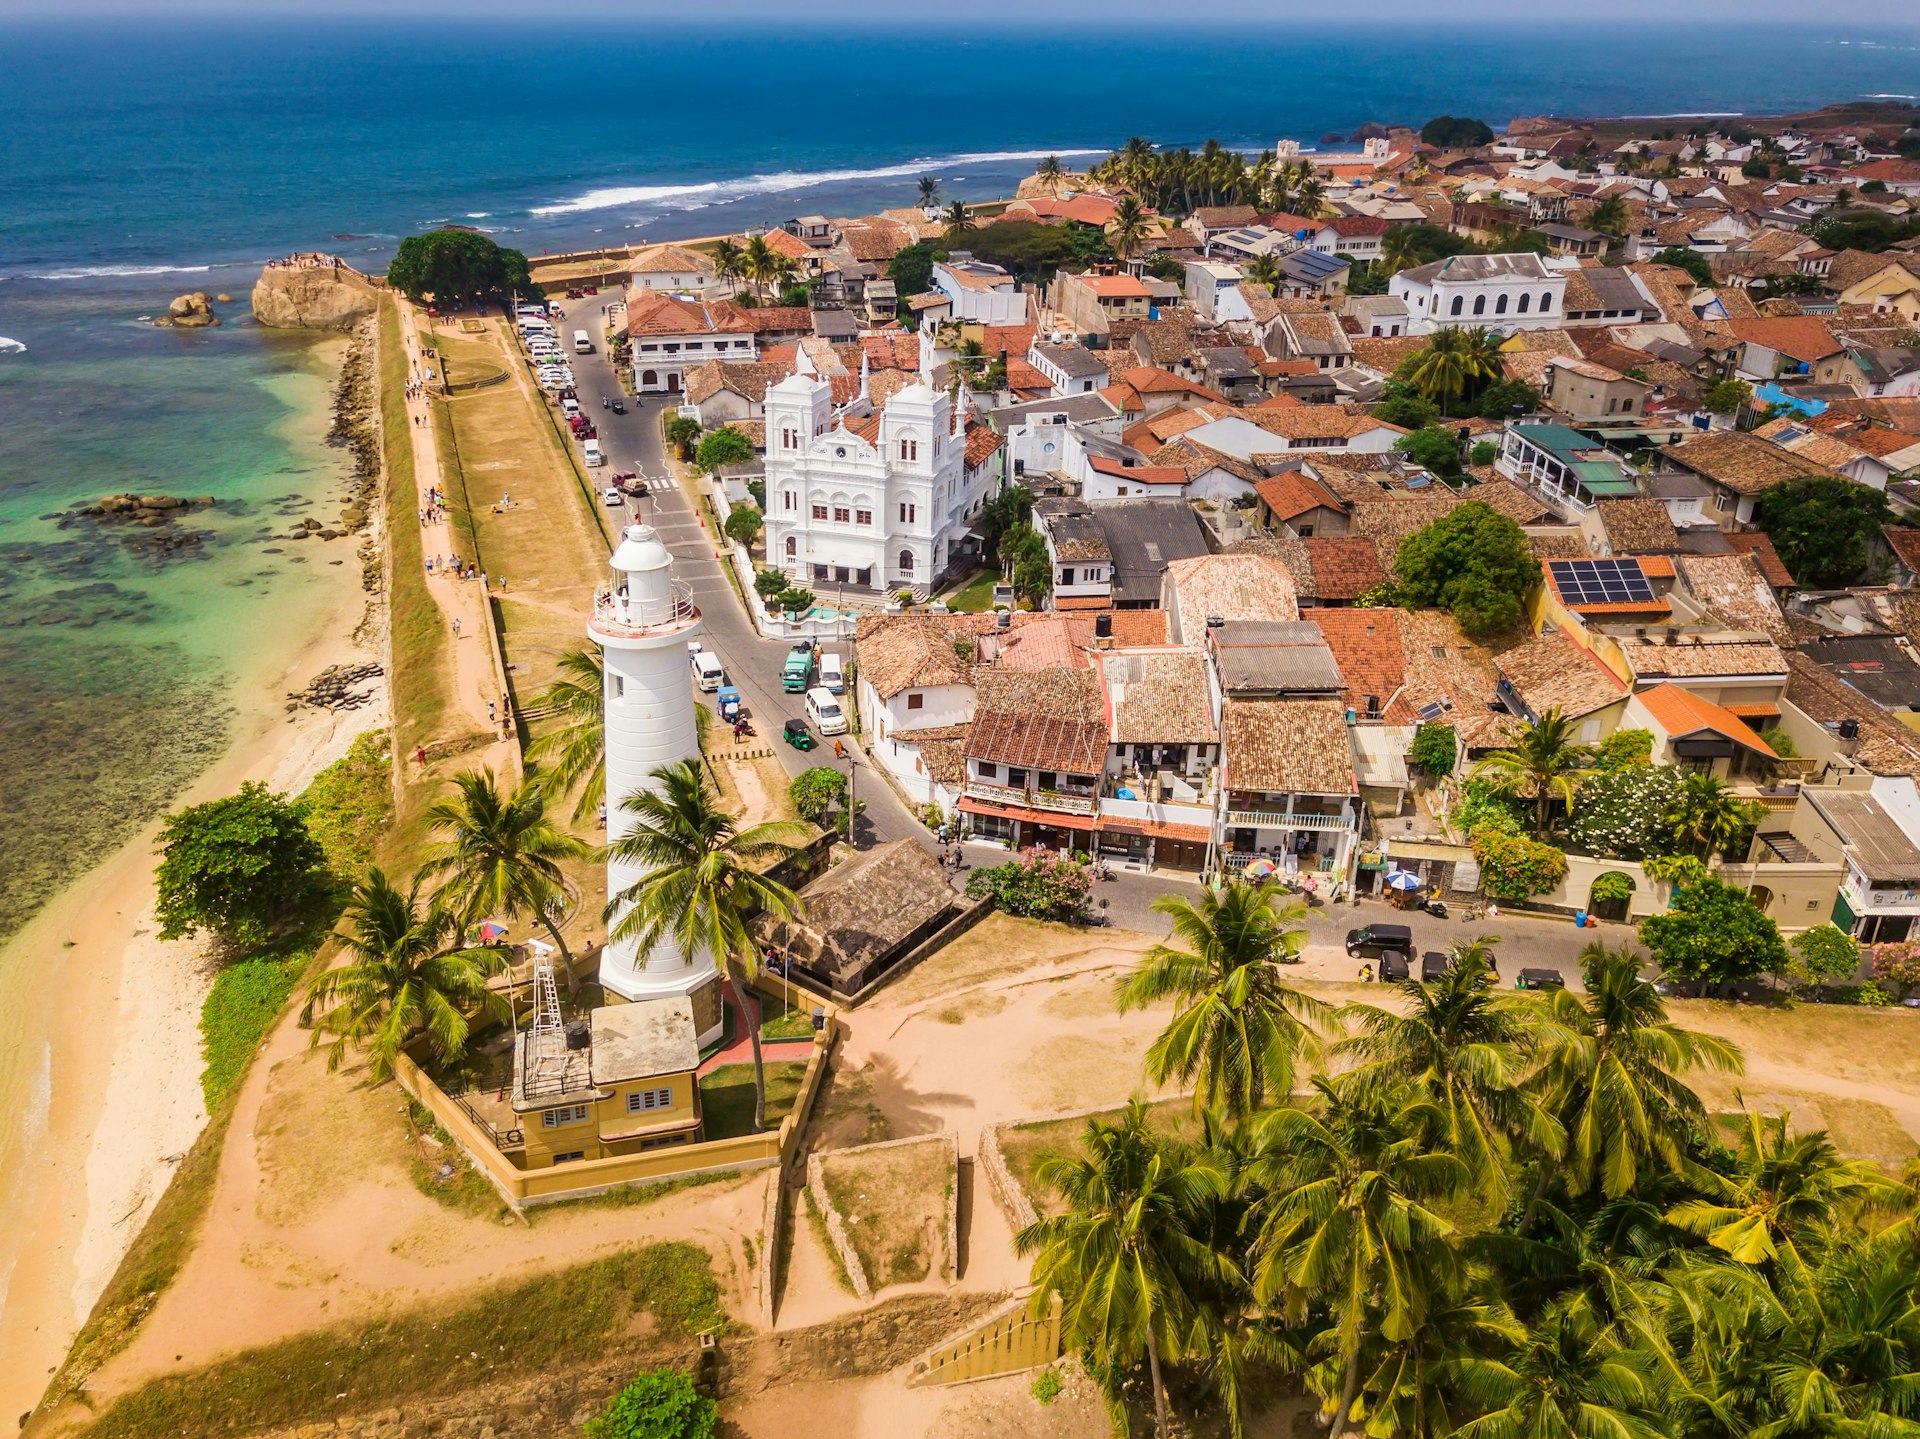 An aerial view of Galle in Sri Lanka. The fort here was built by the Dutch and is surrounded by roads, palm trees and blue ocean.